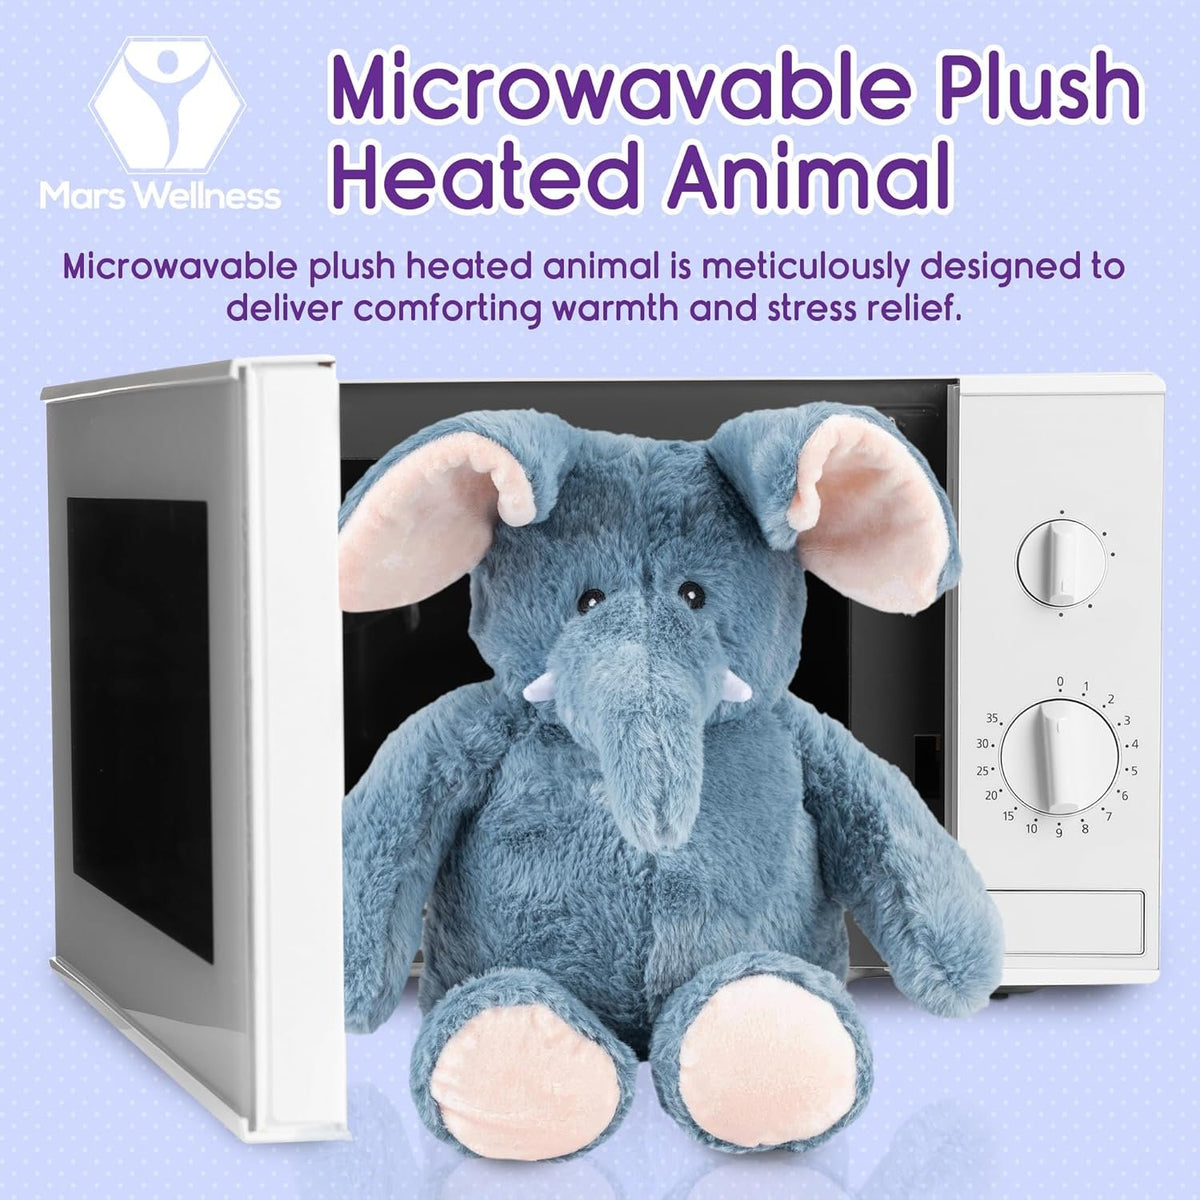 Lavender Scented Microwavable Plush Elephant - Heated Stuffed Animals - Hot or Cold Therapy, Bedtime Buddy, Travel Companion, Anxiety and Colic Relief - Elephant